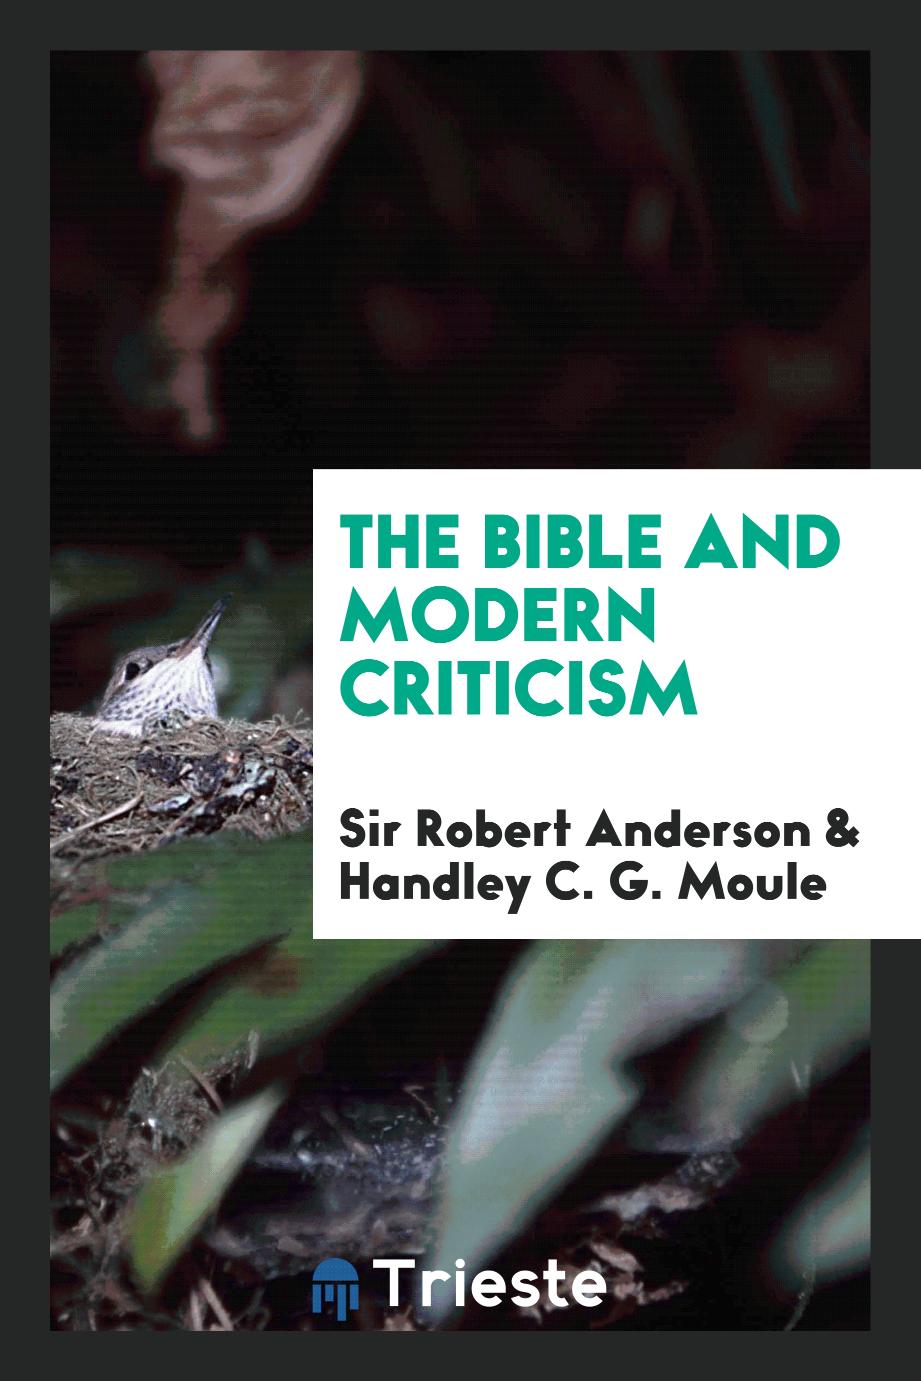 Sir Robert Anderson, Handley C. G. Moule - The Bible and Modern Criticism